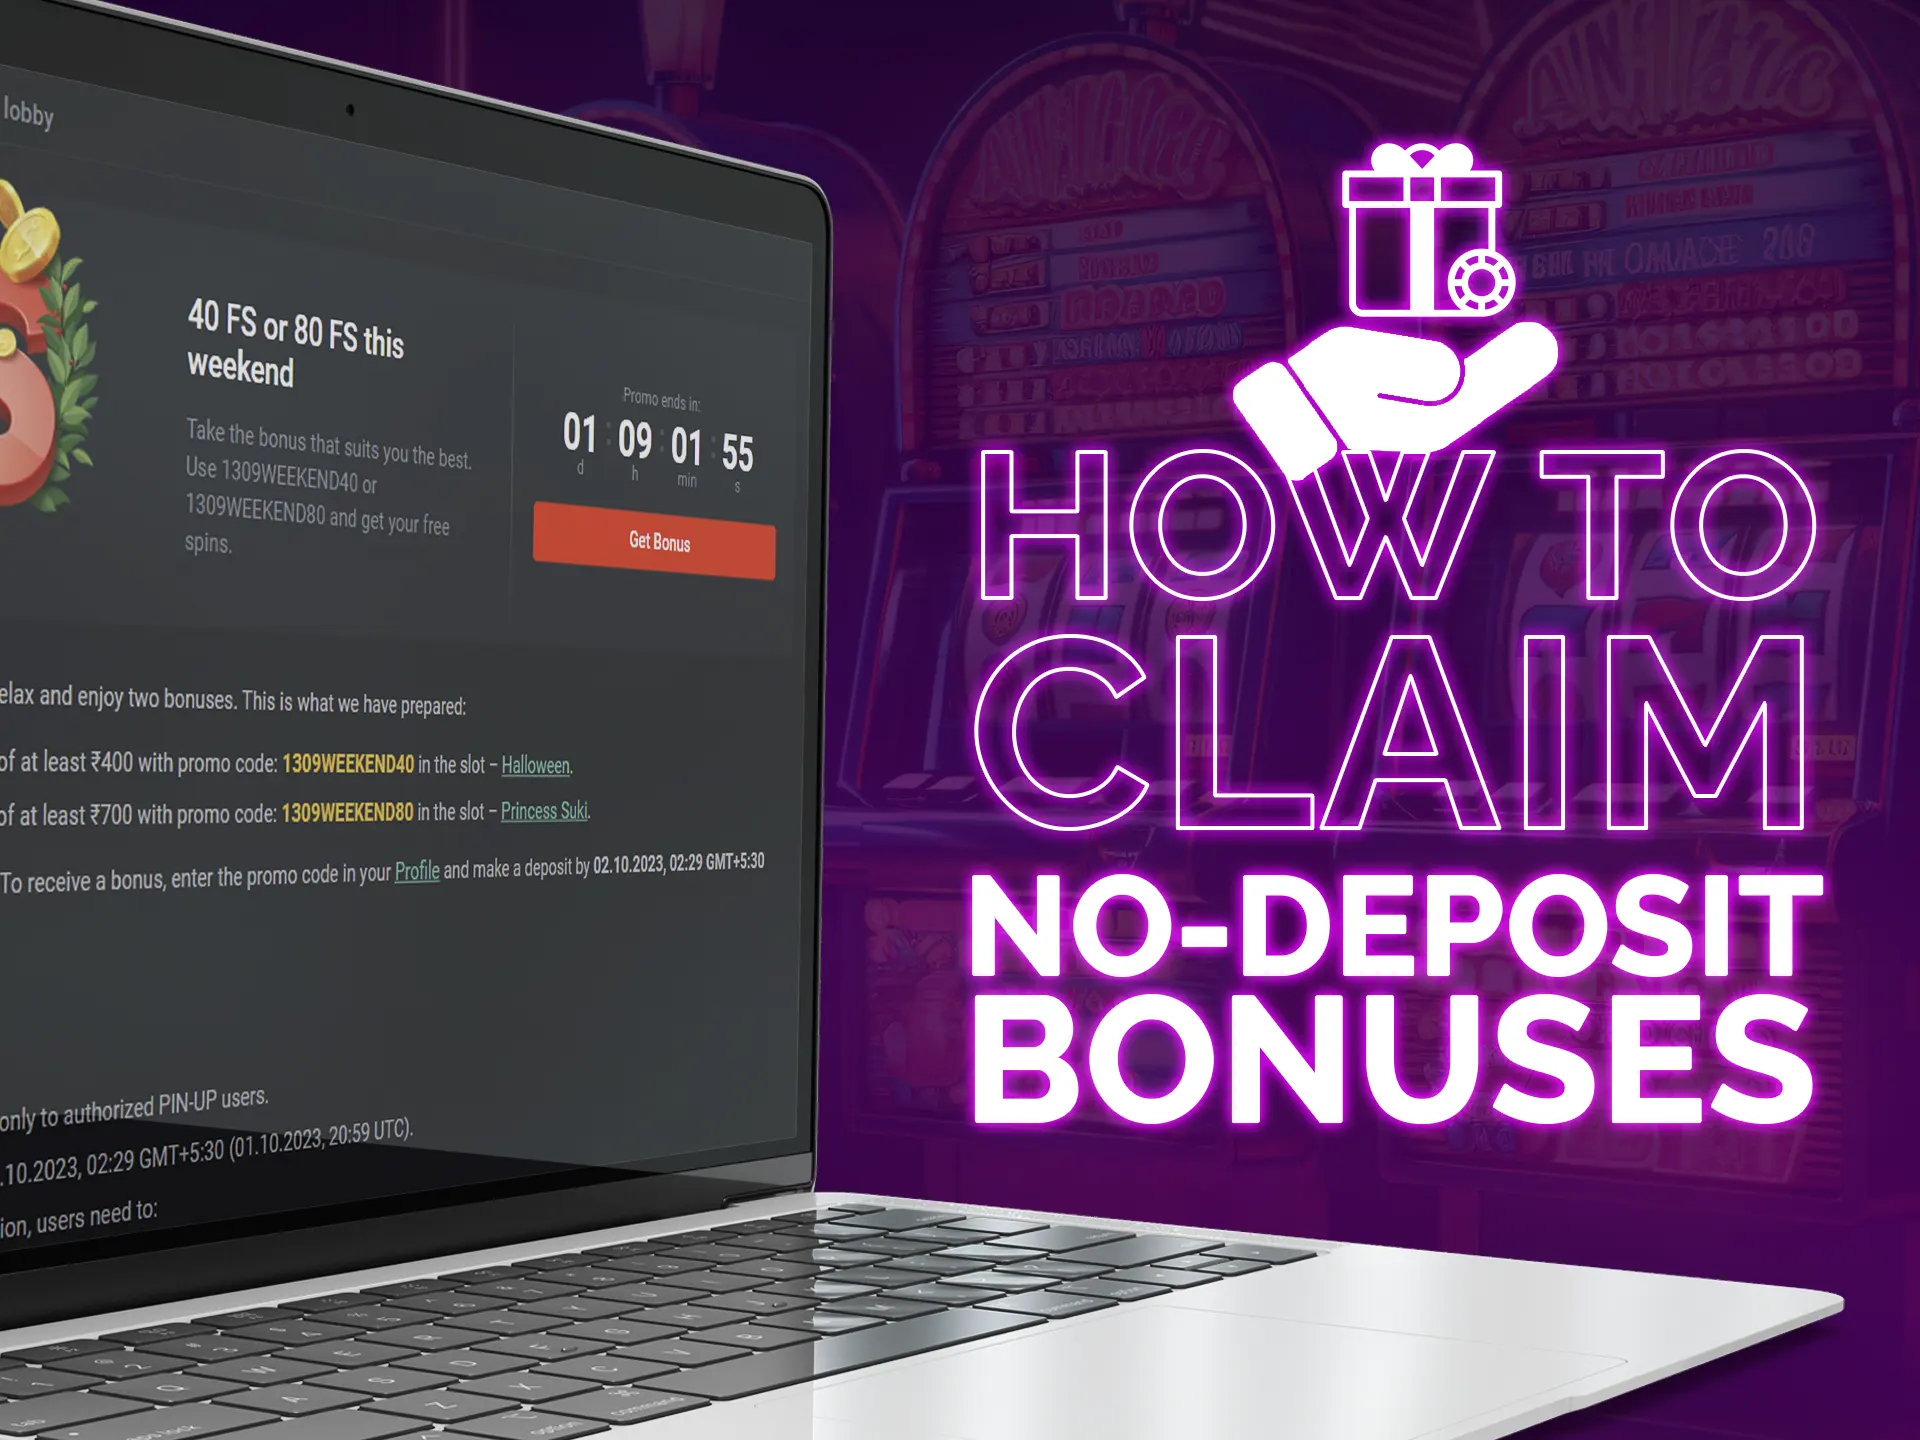 Find out how you can claim a no-deposit bonus.